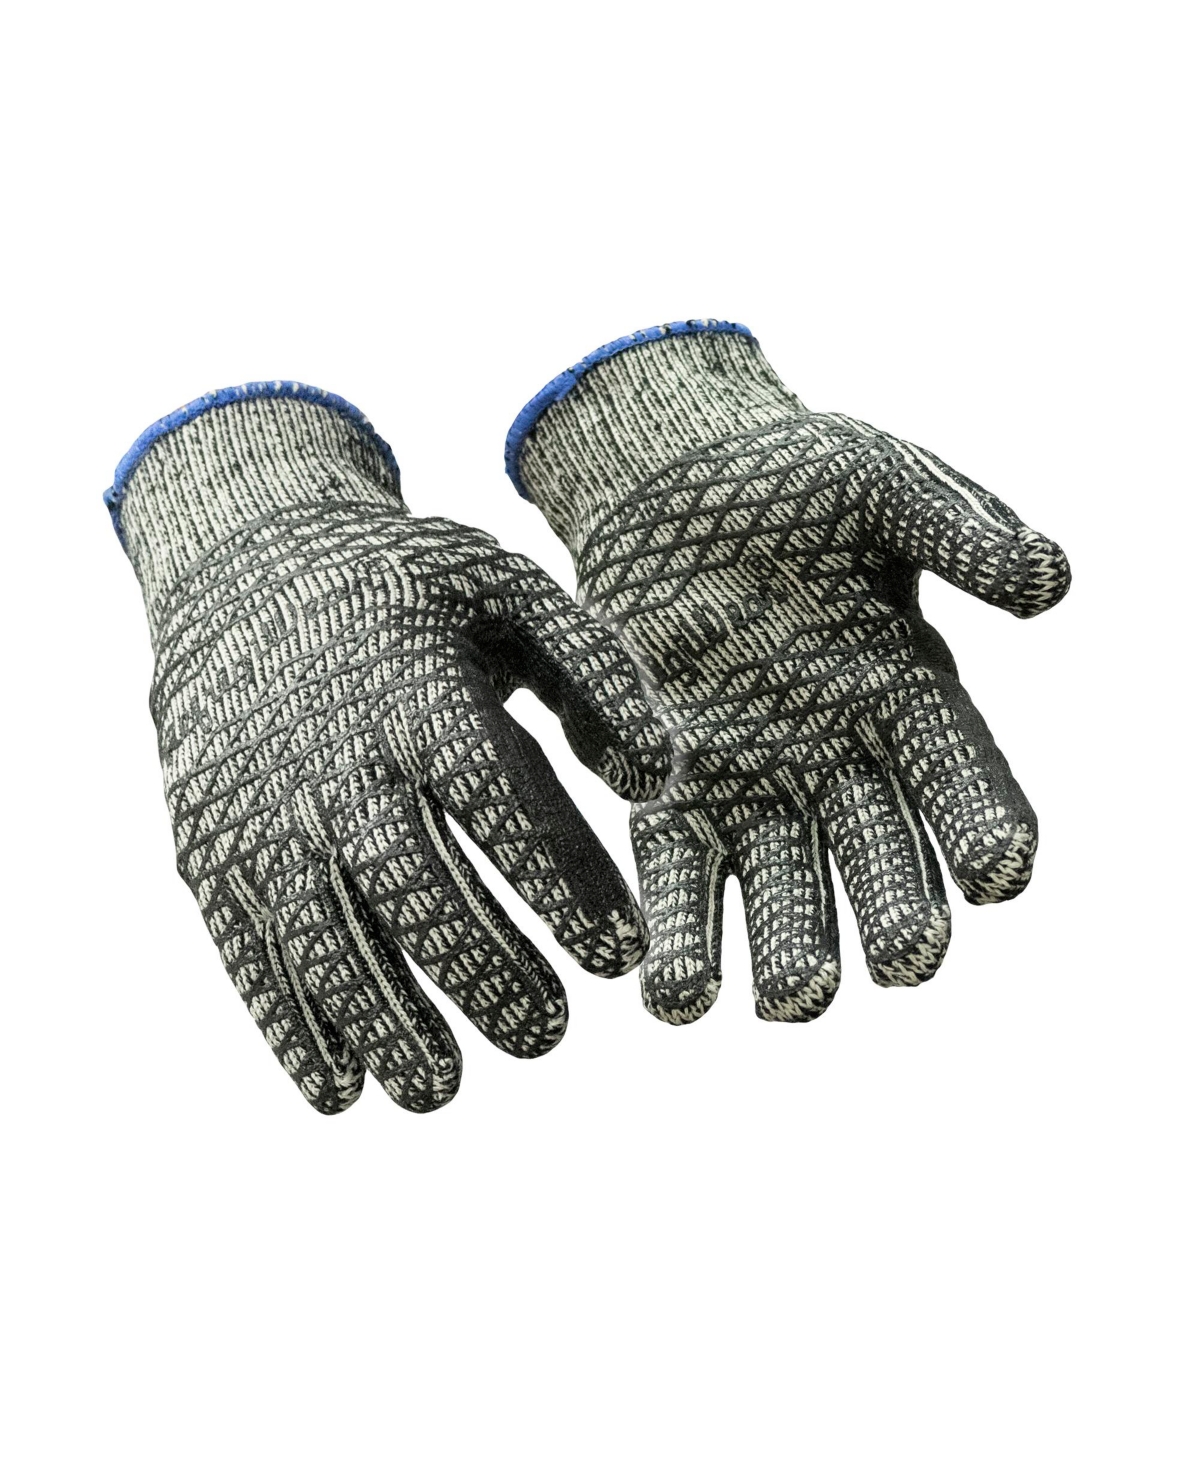 Men's Glacier Grip Gloves with Double Sided Pvc Honeycomb Grip (Pack of 12 Pairs) - Grey